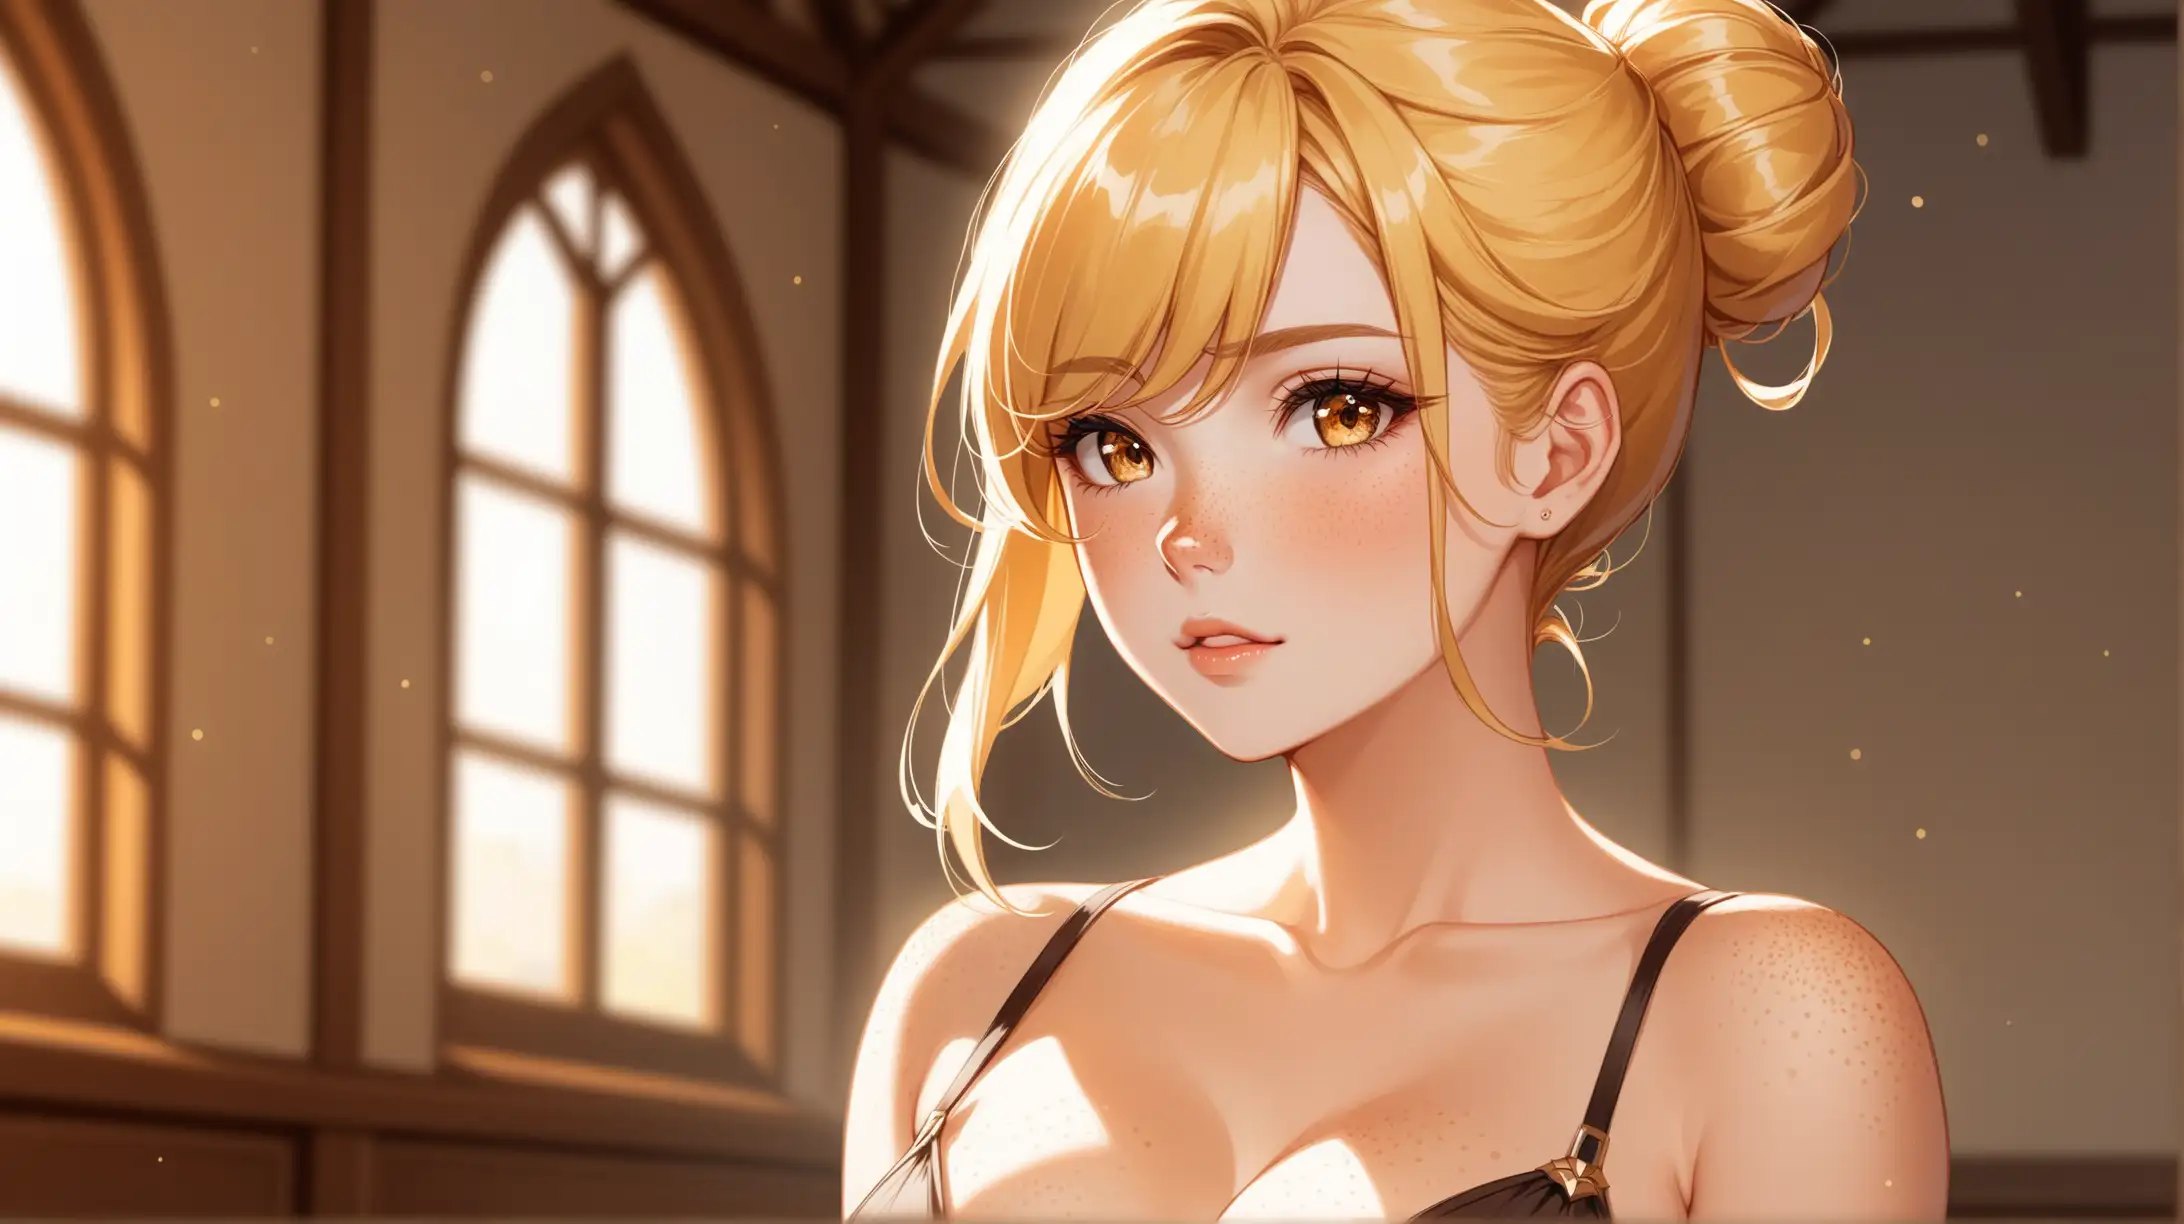 Draw a woman, long blonde hair in a bun, gold eyes, freckles, perky figure, outfit inspired from Genshin Impact, high quality, cowboy shot, indoors, seductive pose, natural lighting, loving gaze